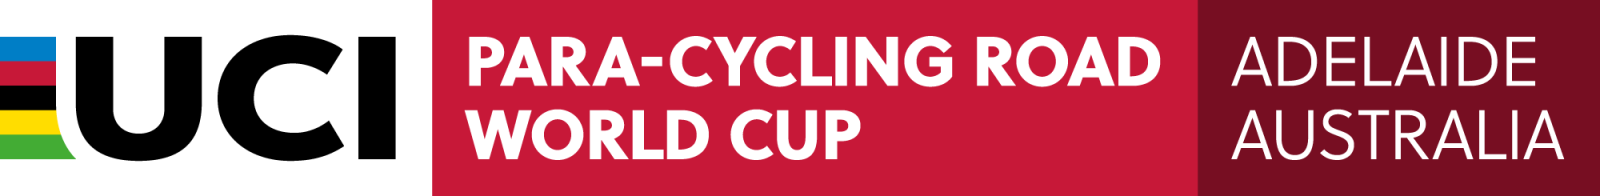 uci_para-road_wcup_adelaide_cmyk.png